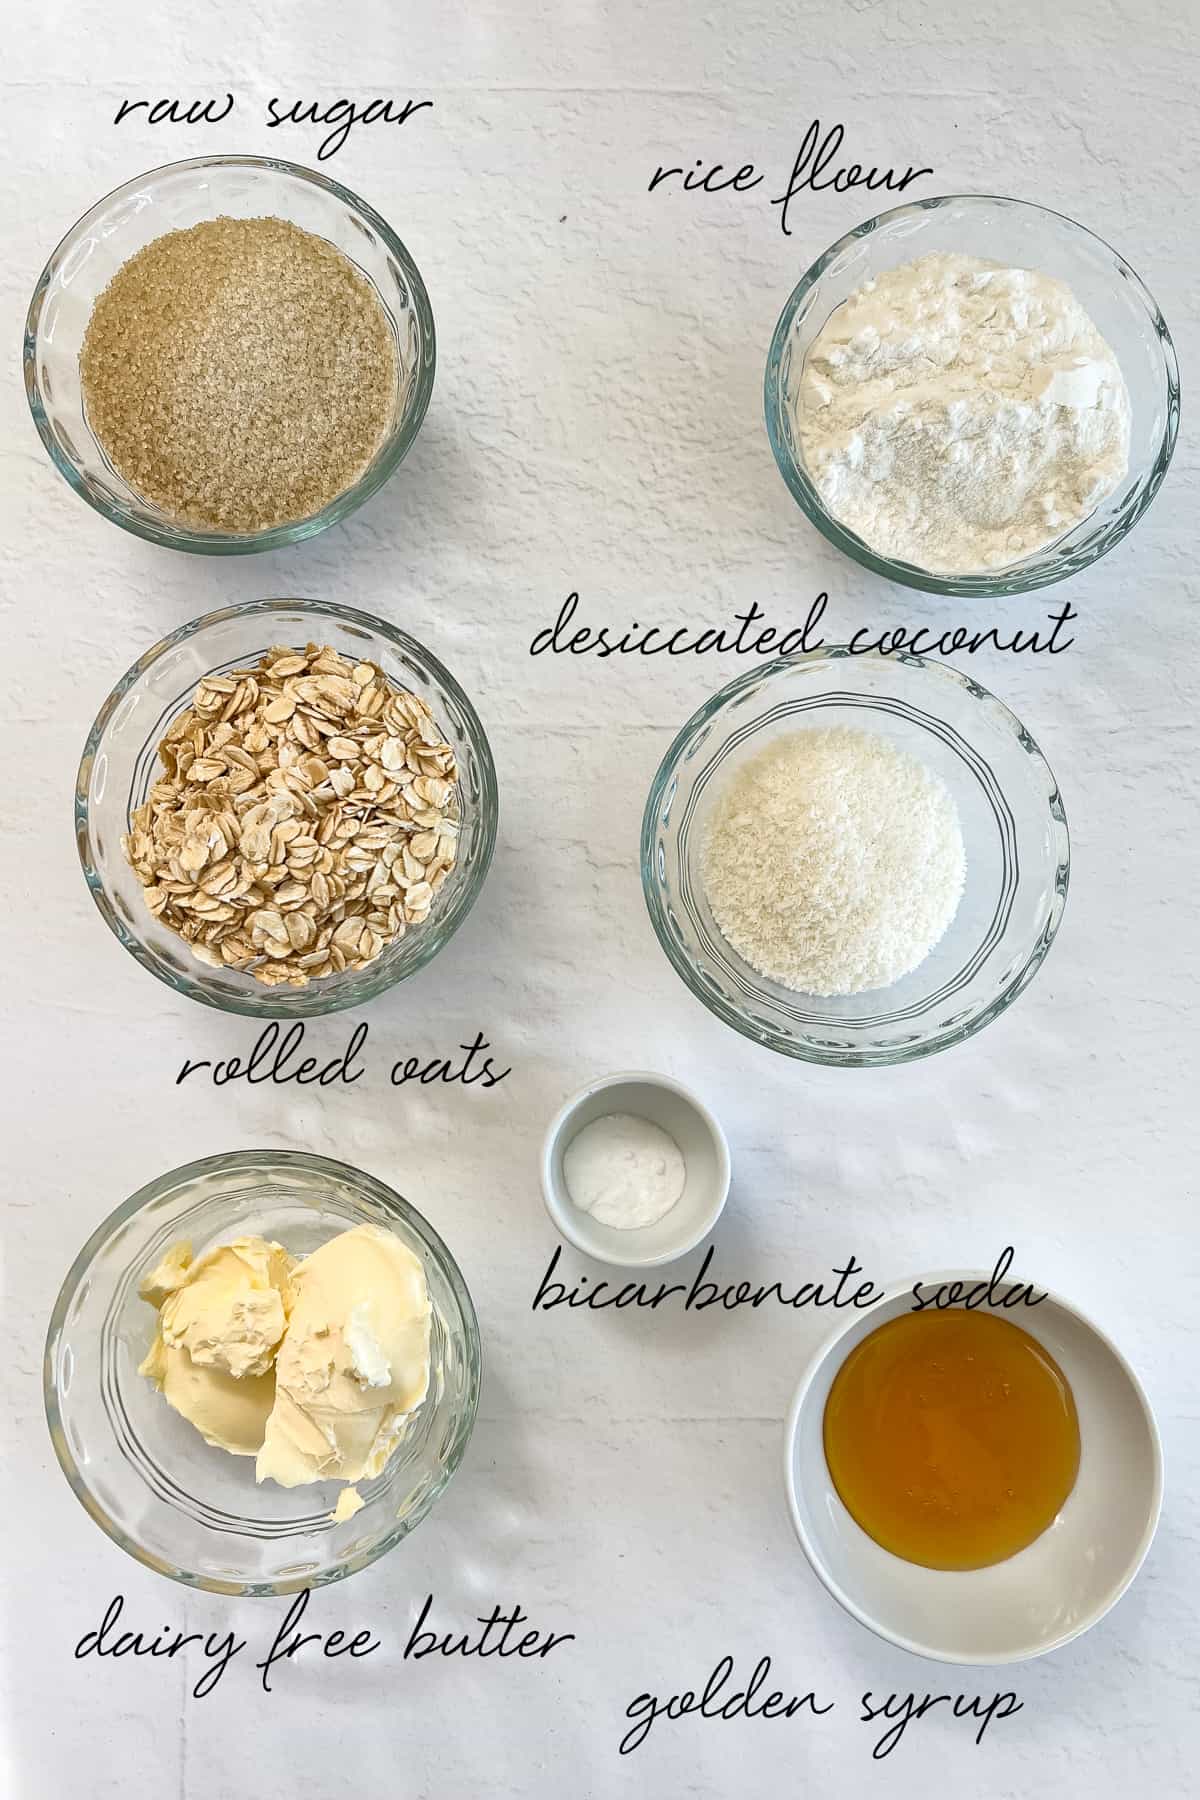 raw sugar, rice flour, rolled oats, desiccated coconut, dairy free butter, bicarb soda and golden syrup laid out in glass bowls